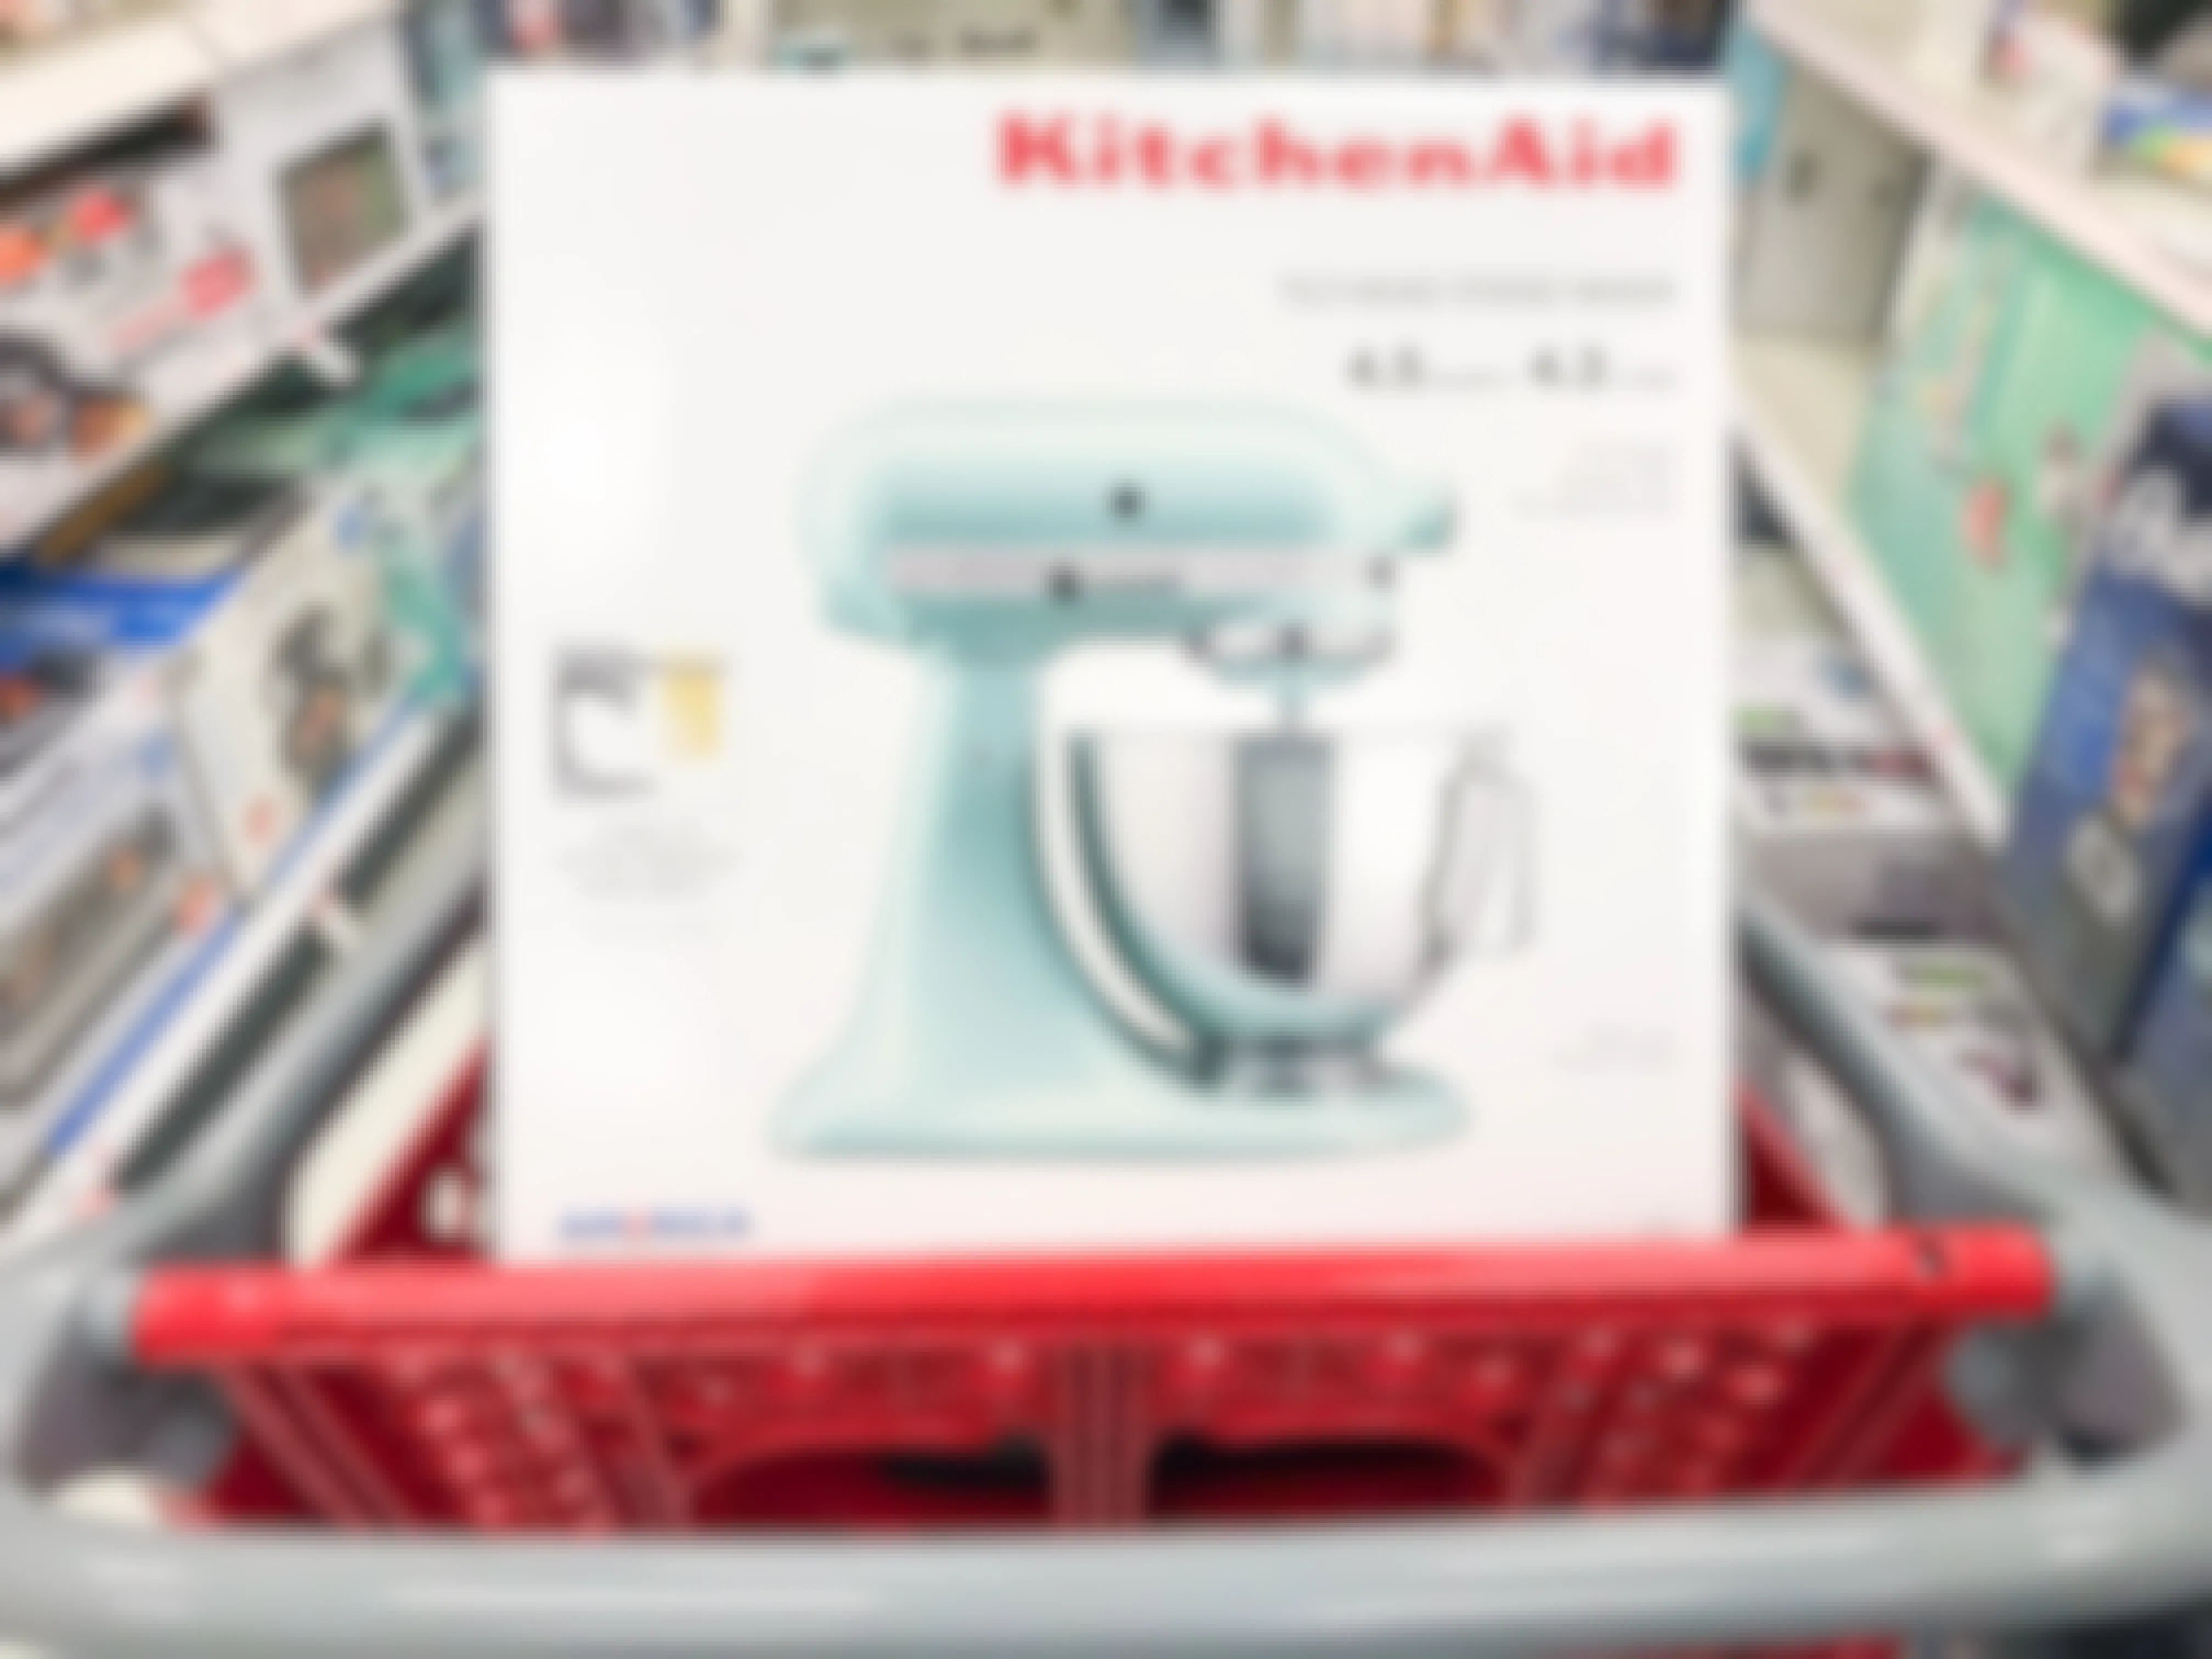 A KitchenAid stand mixer box sitting in the basket of a Target shopping cart in the small kitchen appliance aisle at Target..